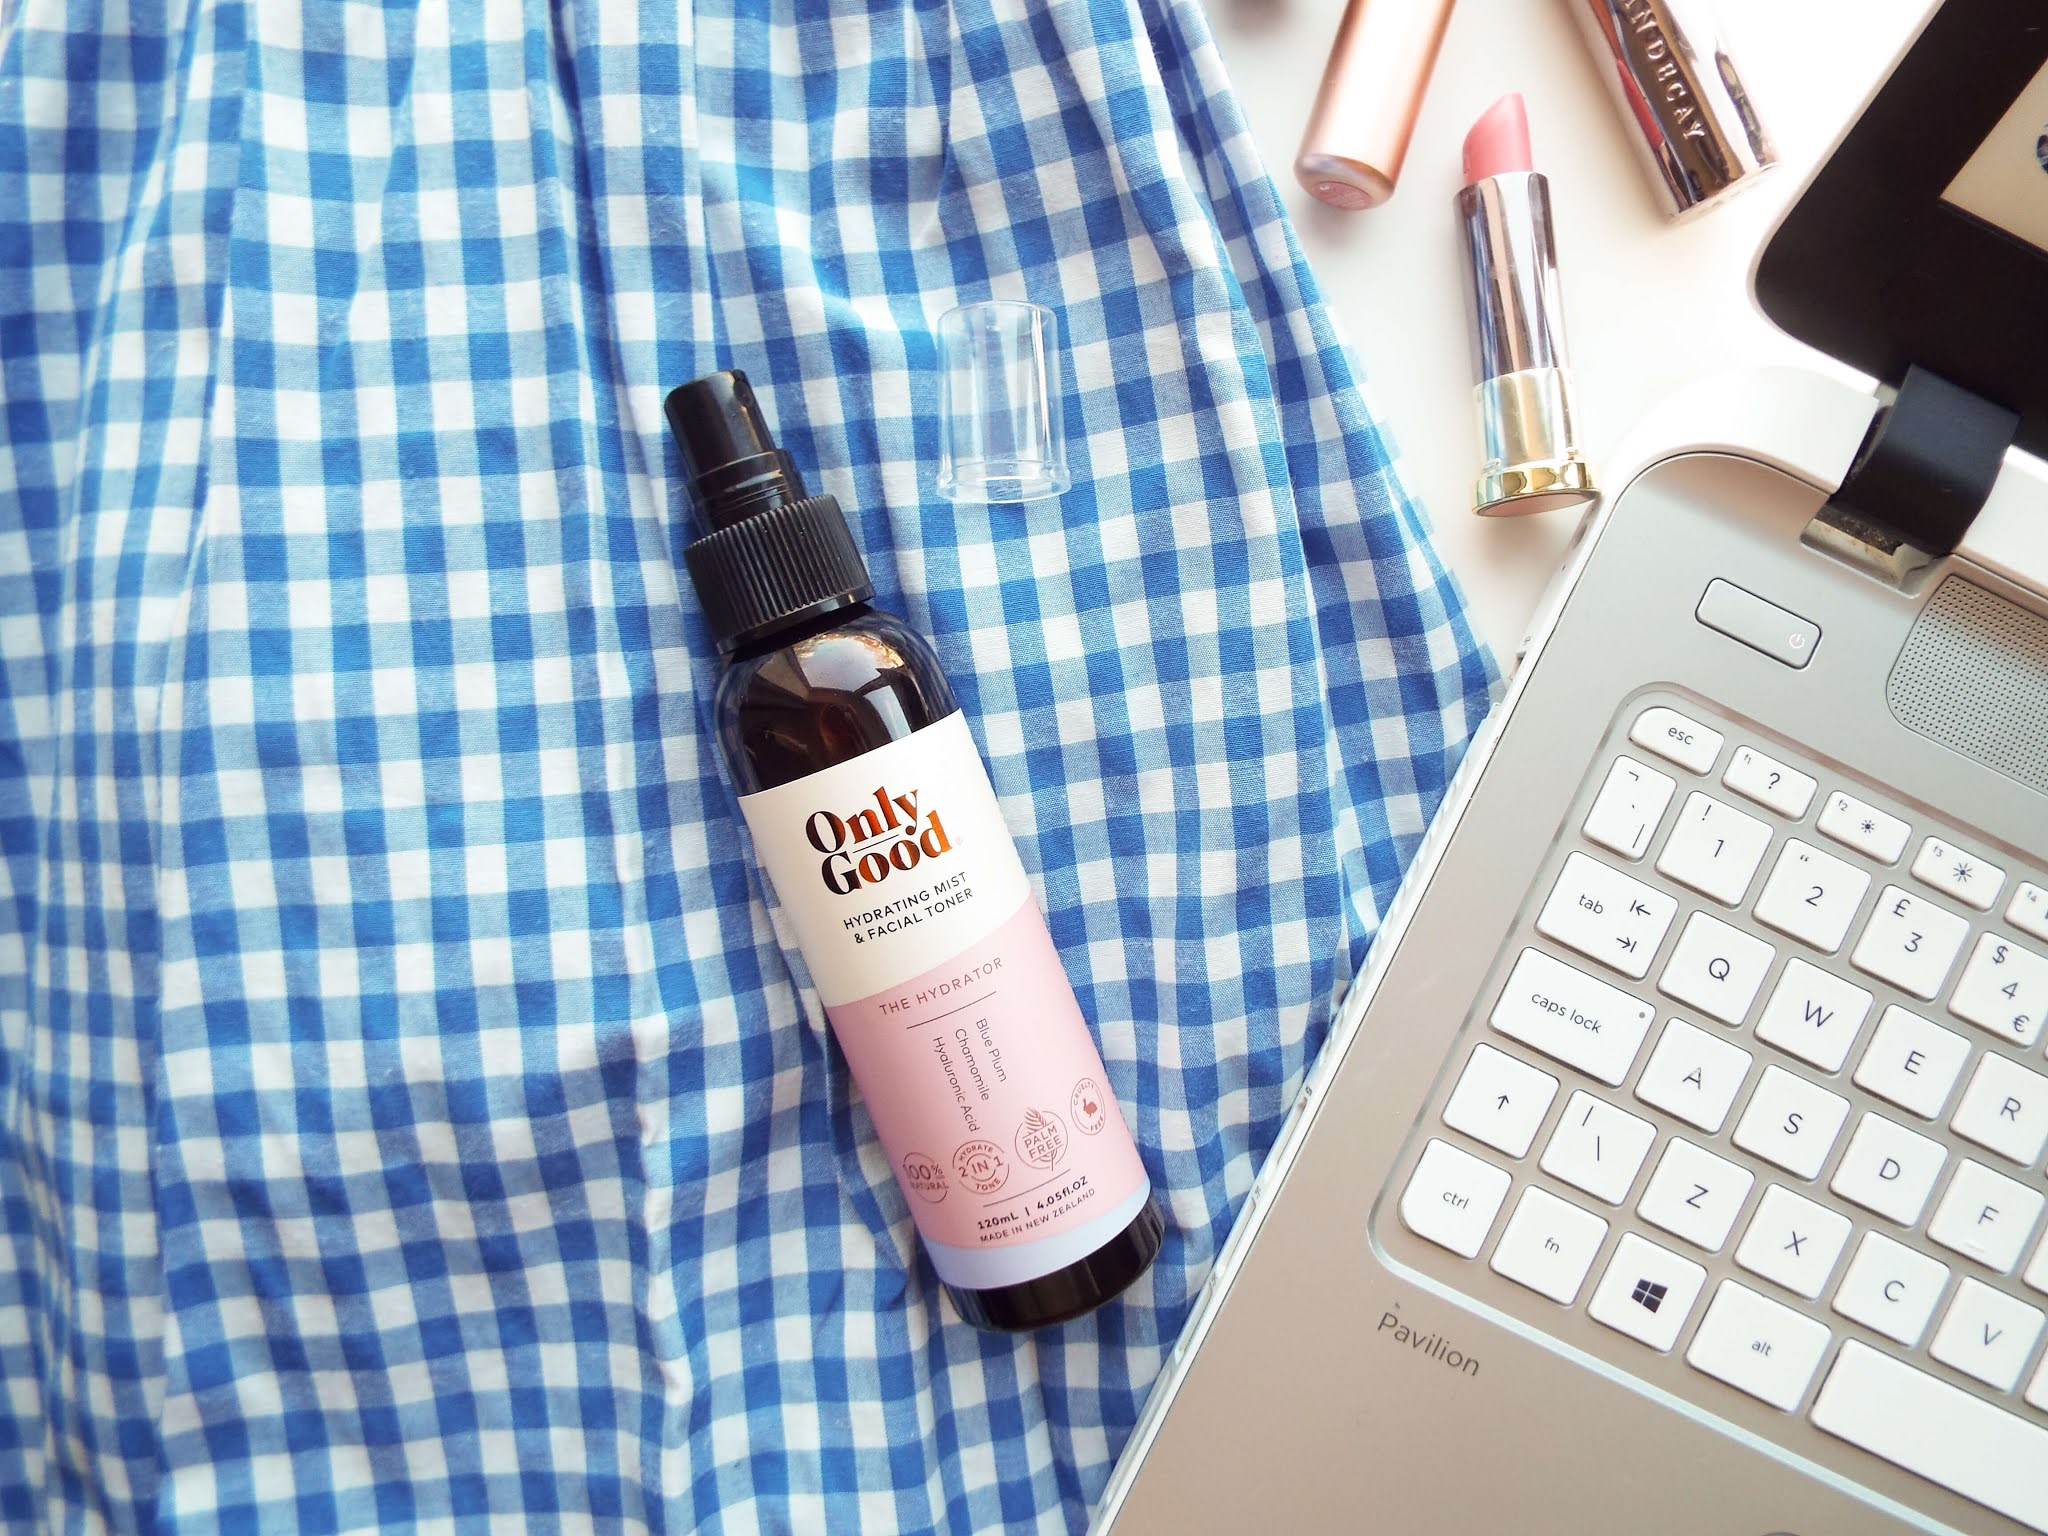 Close up of flatlay, focusing on skincare sat on dress, with laptop keyboard to the left.